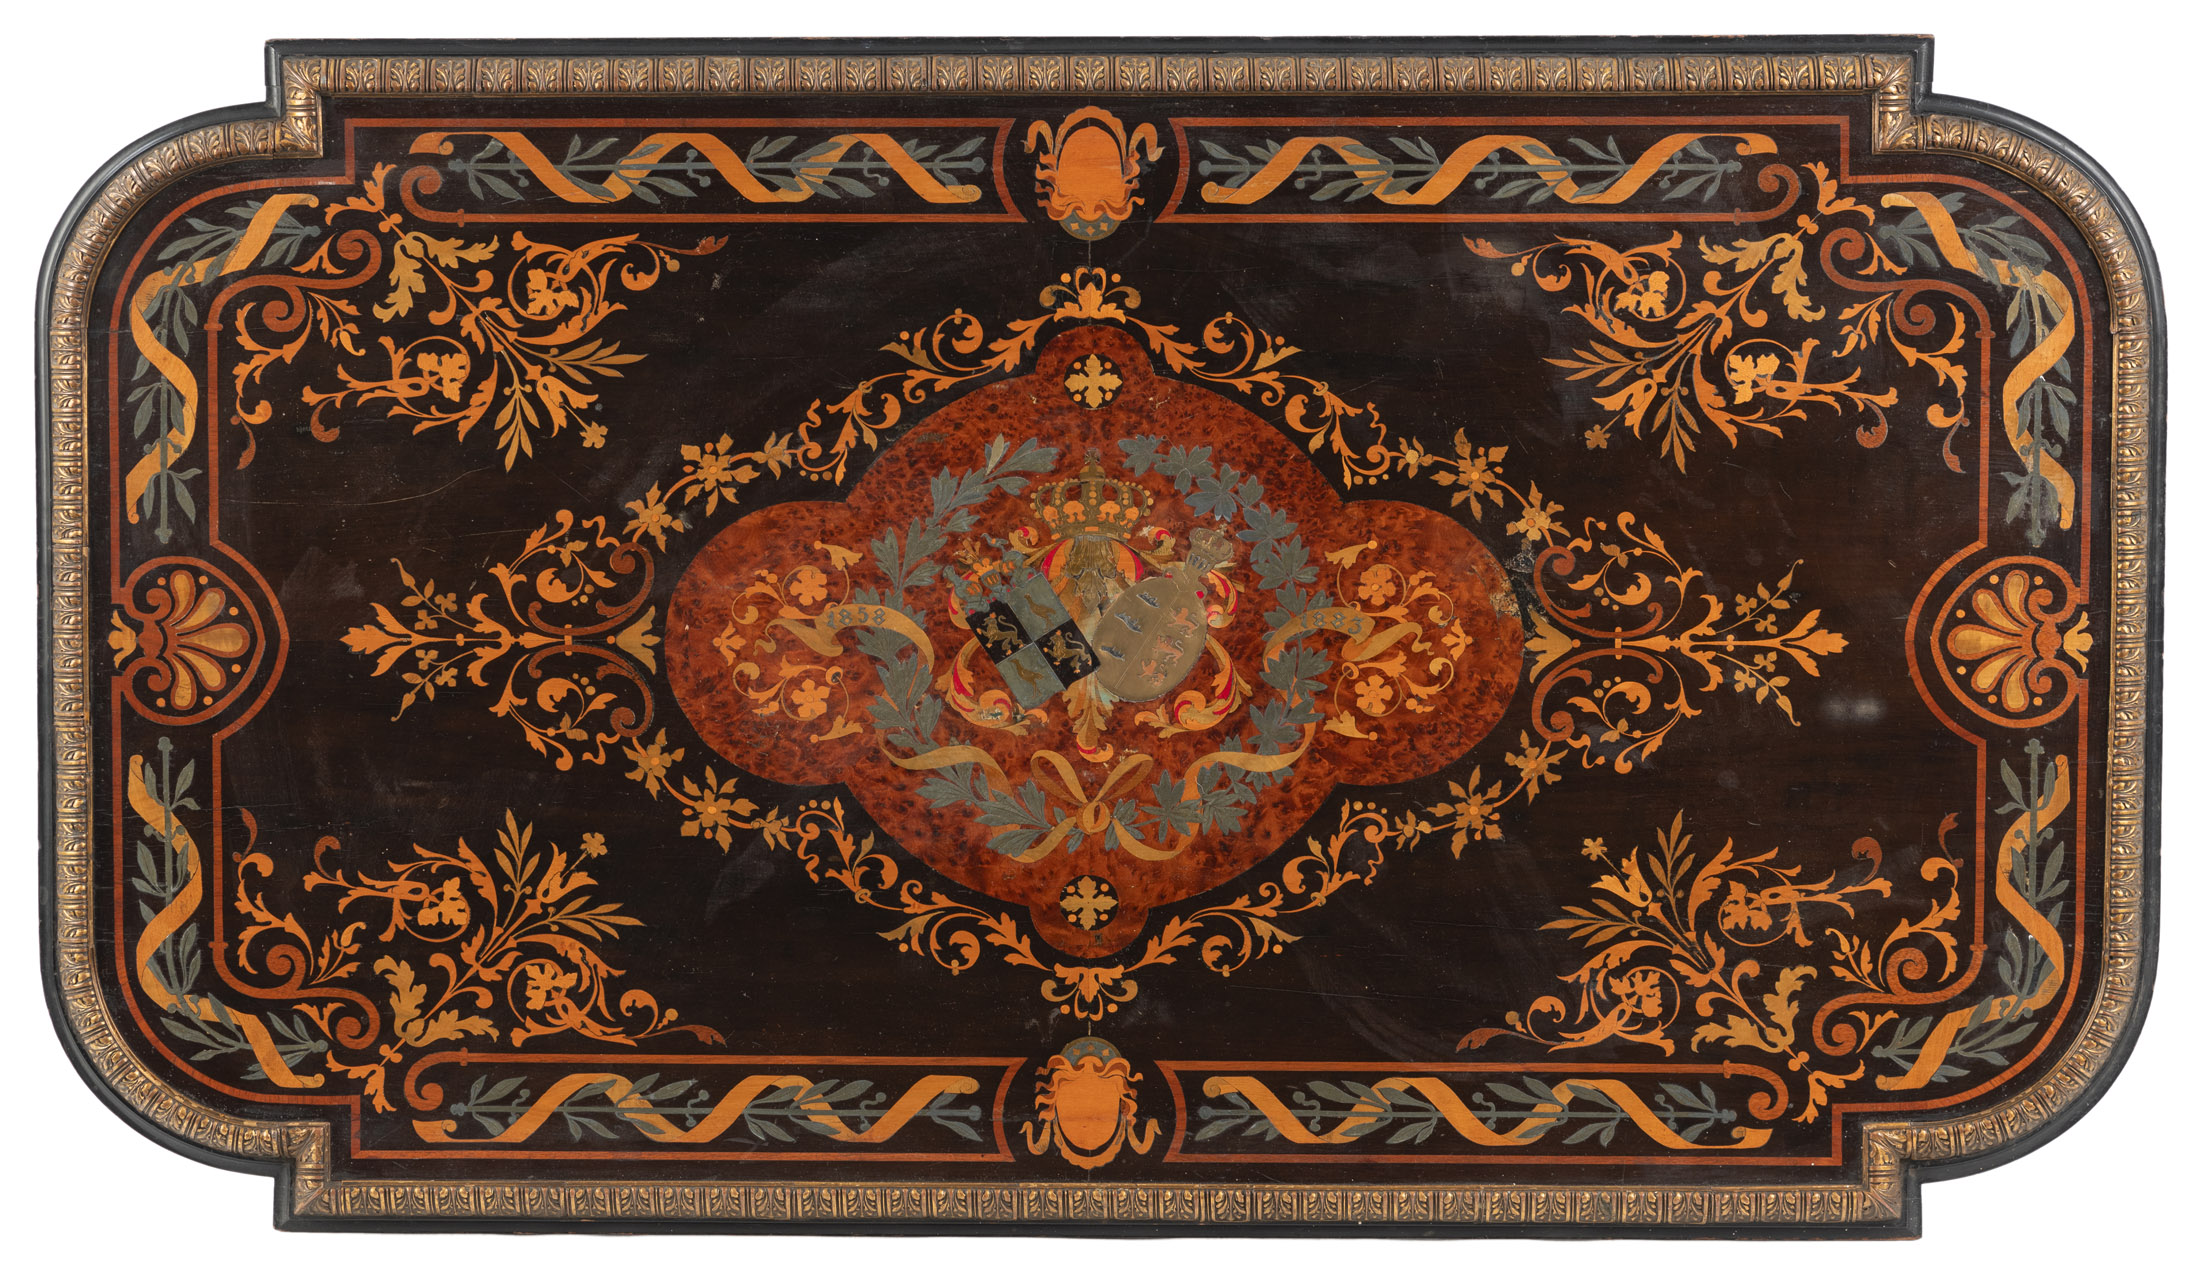 Magnificent centre table with the alliance coat of arms of Agnes von Württemberg and Prince Heinric - Image 4 of 11